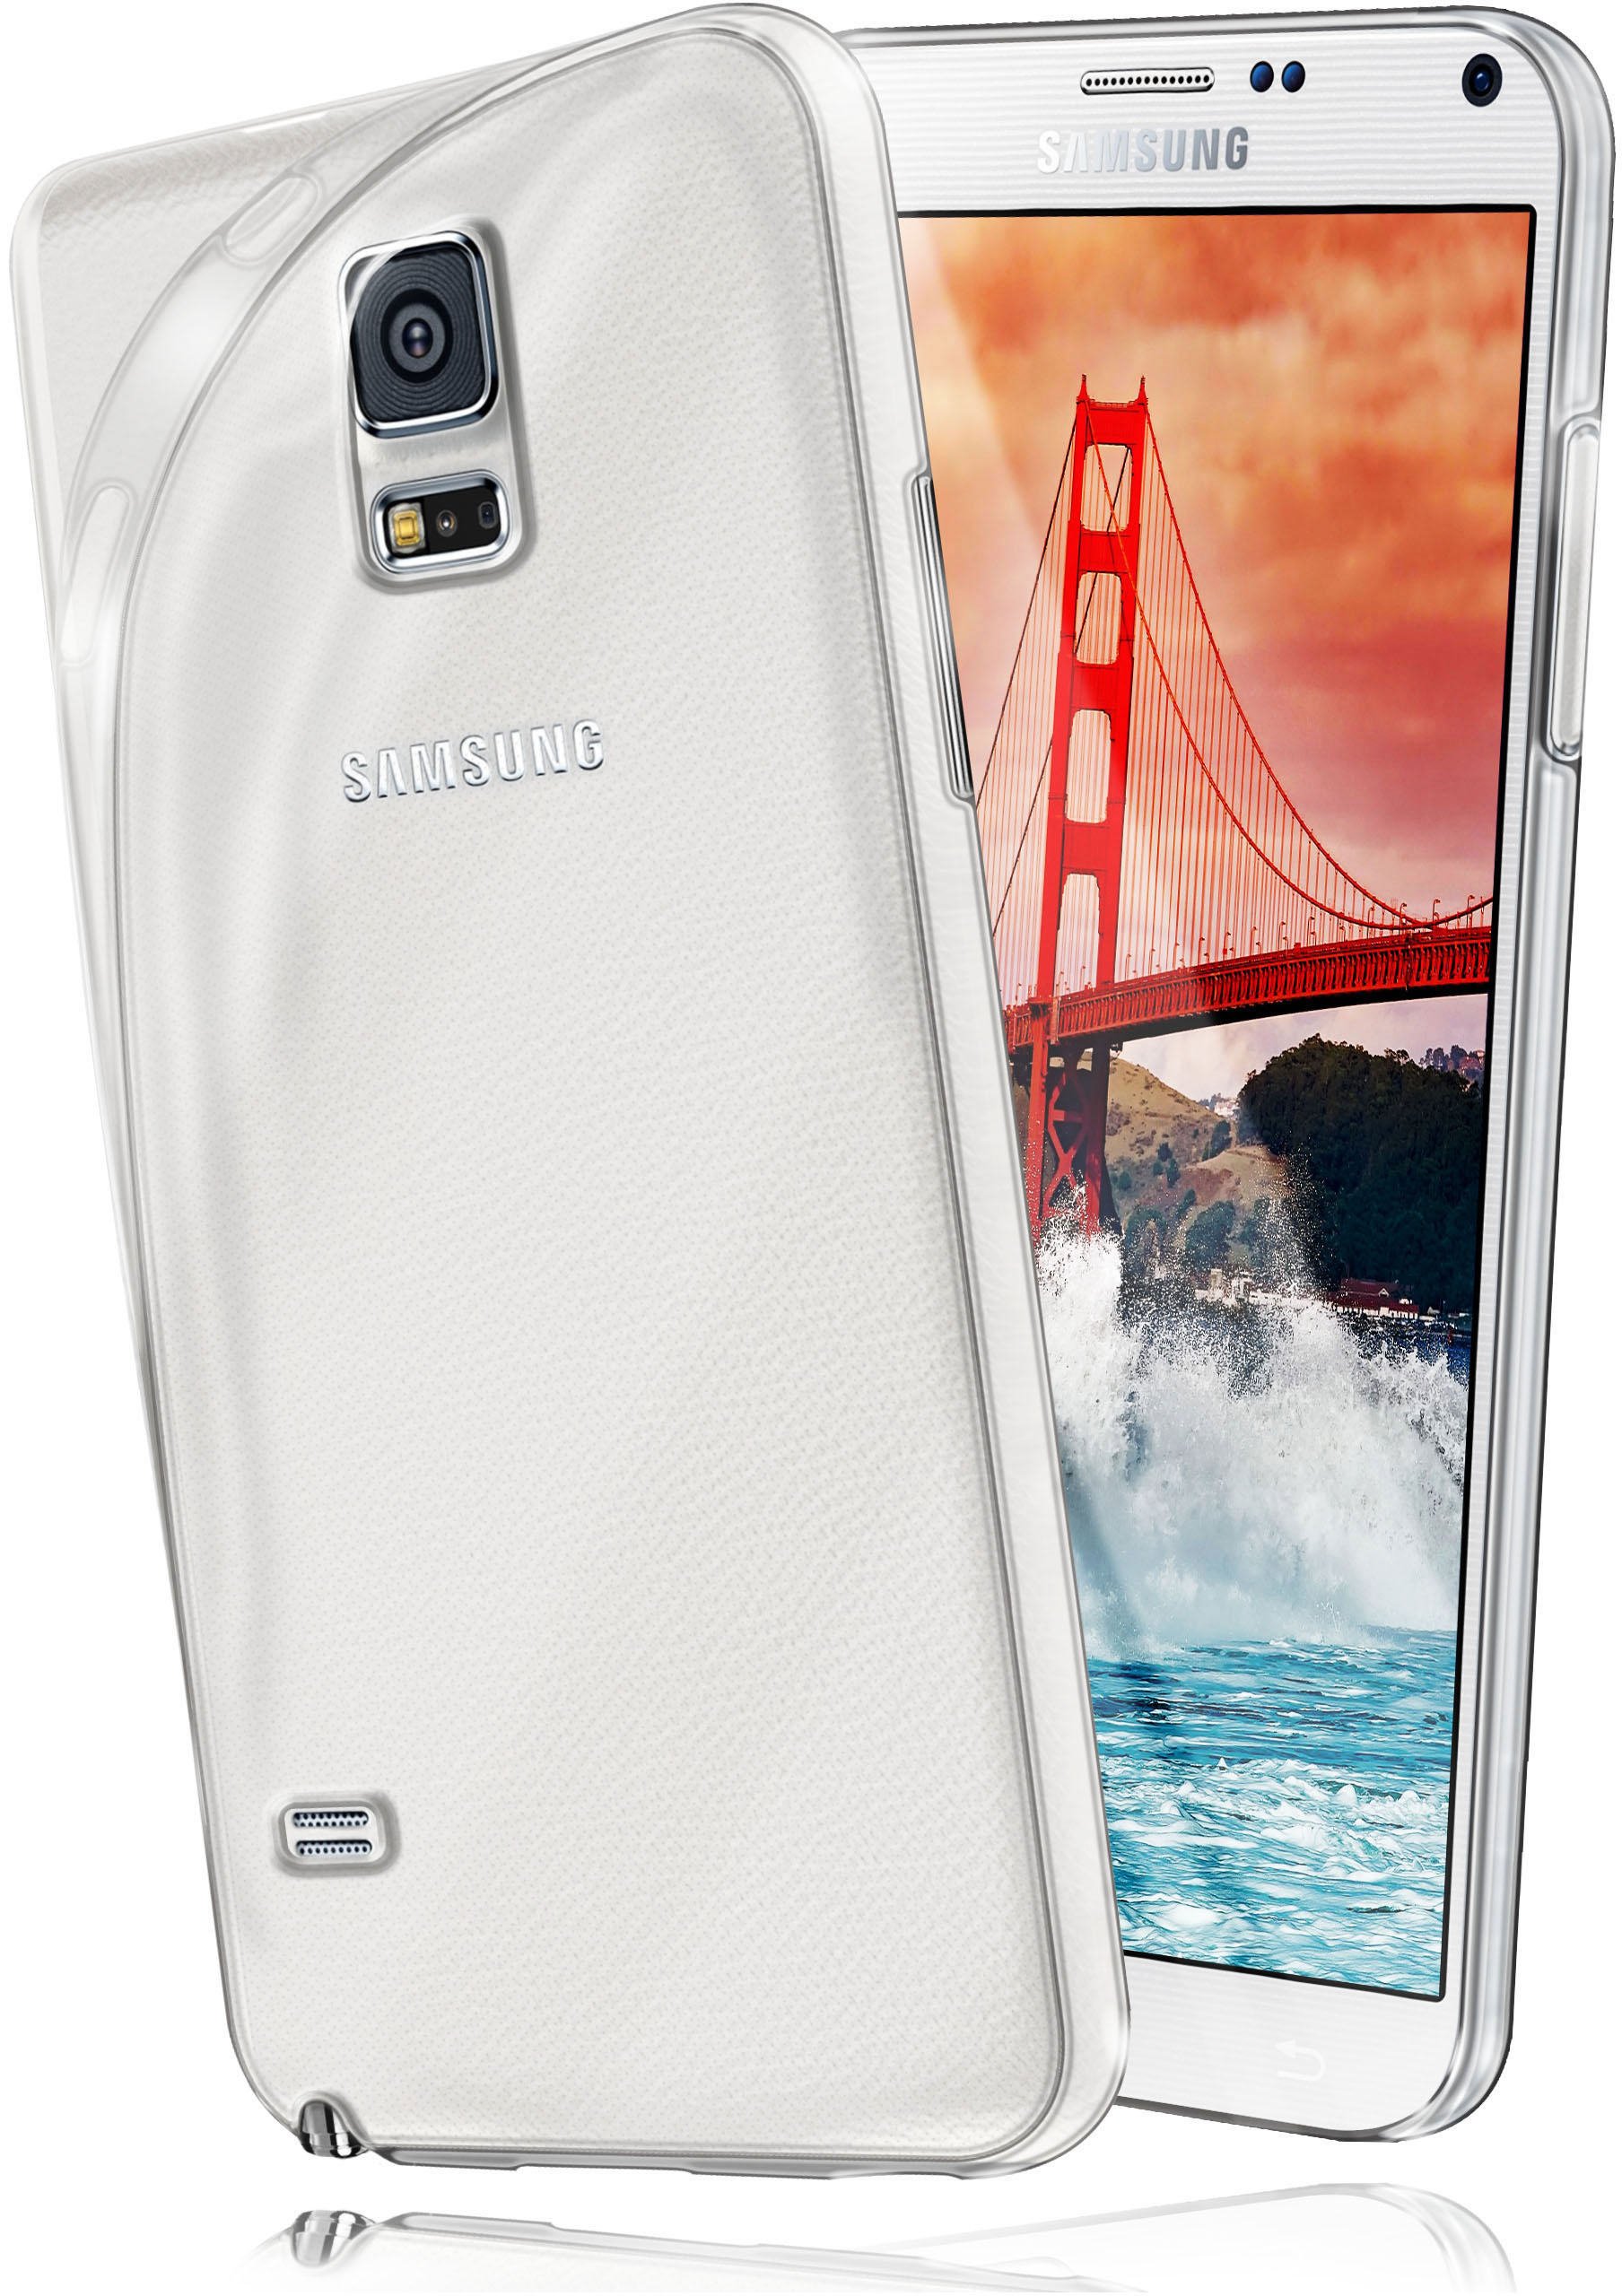 Galaxy Backcover, Aero Samsung, 4, Note Case, Crystal-Clear MOEX